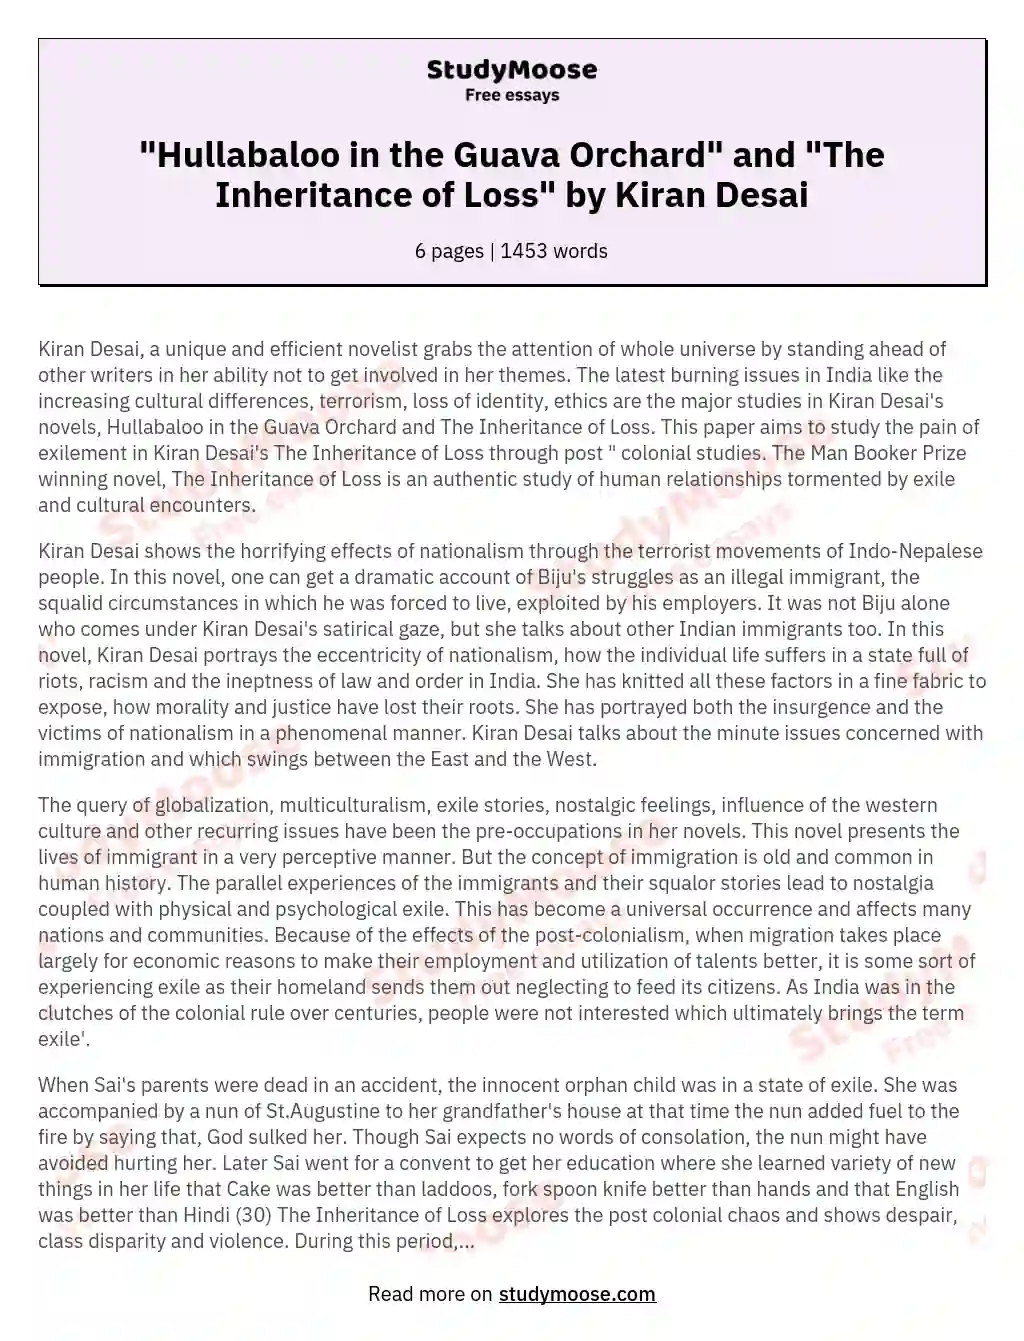 "Hullabaloo in the Guava Orchard" and "The Inheritance of Loss" by Kiran Desai essay